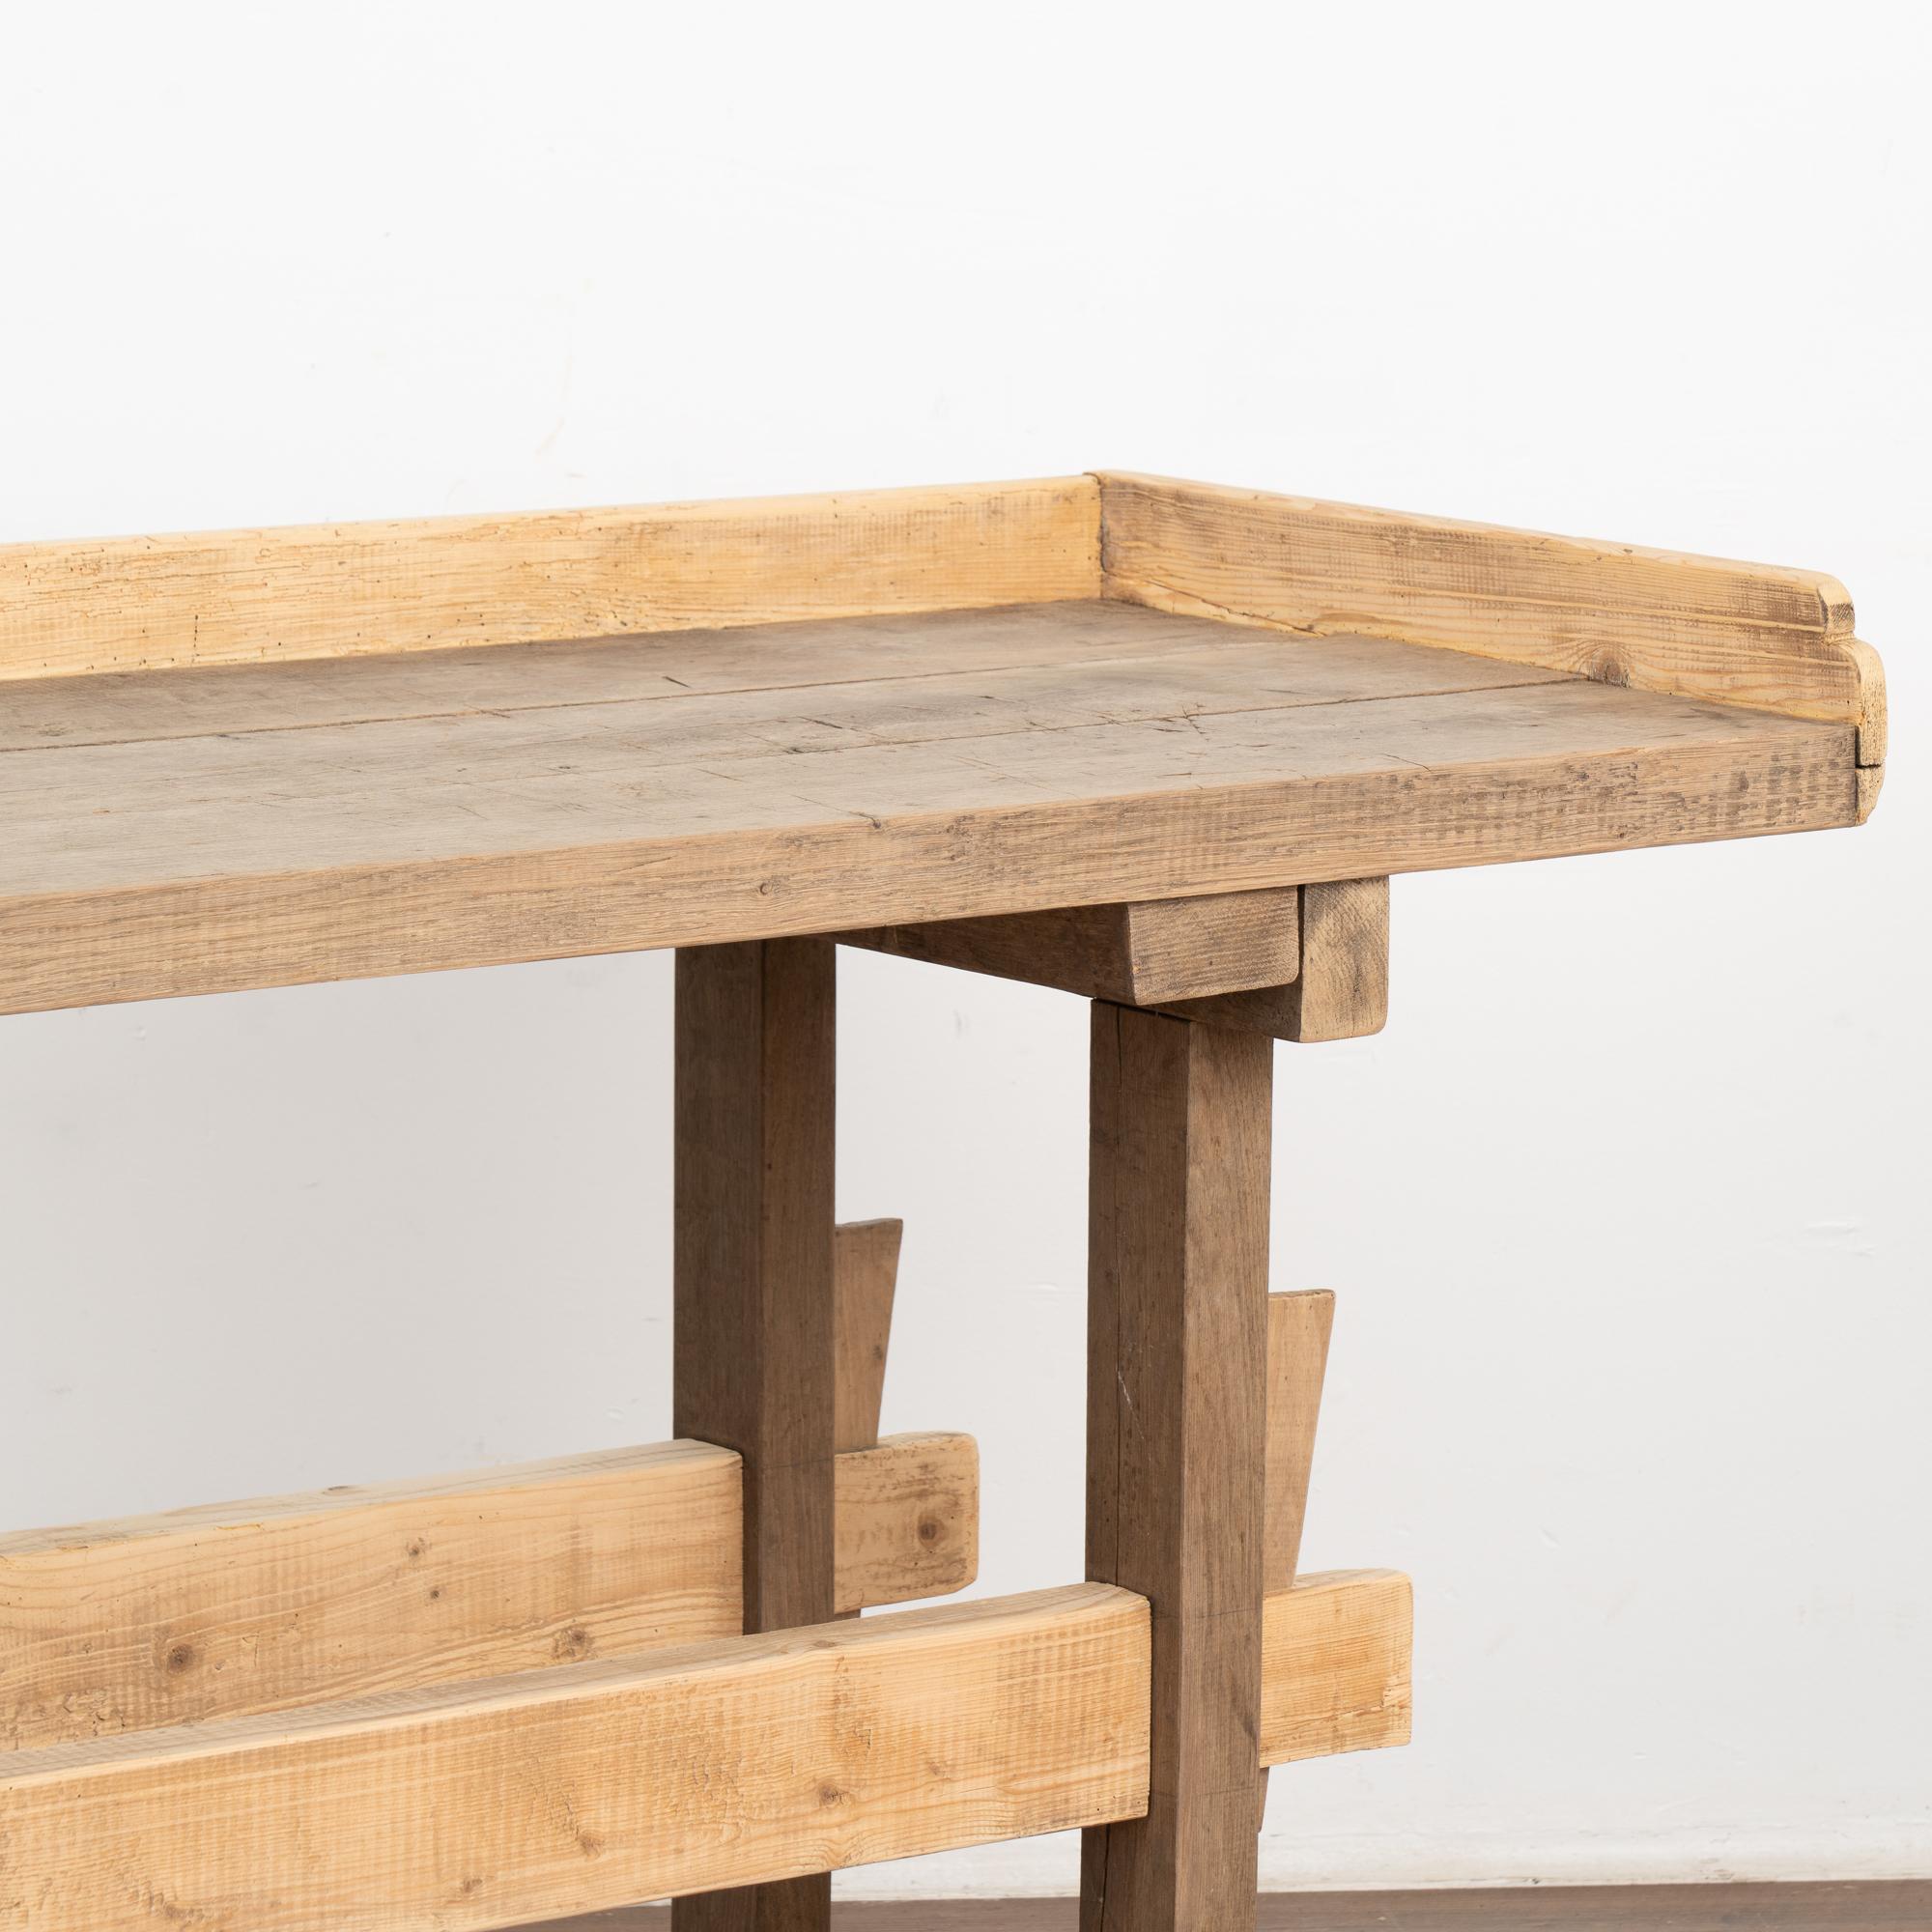 Wood Rustic Work Table Console Table, circa 1880 from Hungary For Sale